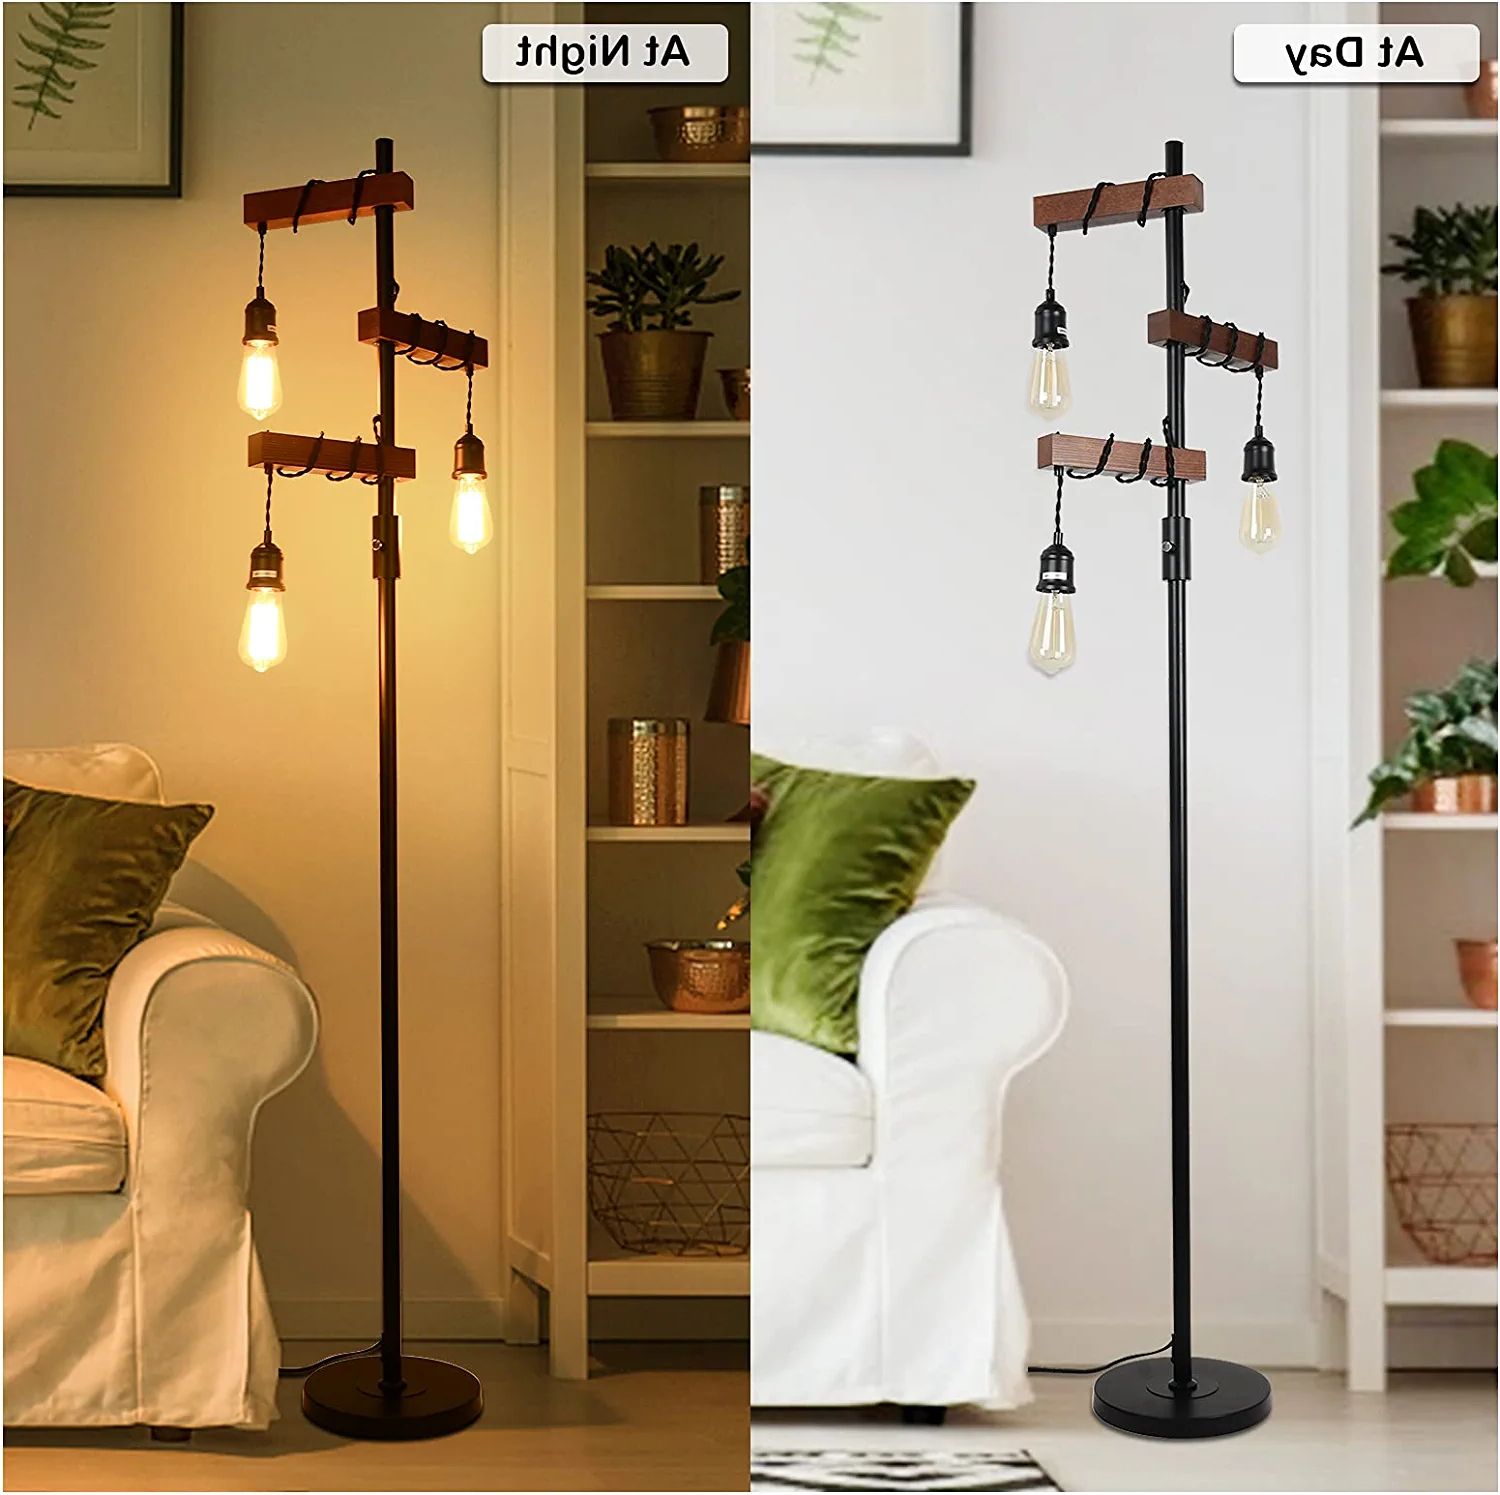 Recent 68 Inch Standing Lamps Throughout Airposta Industrial Floor Lamp Farmhouse Tree Floor Lamp 68 Inch 3 Lights  Wood Standing Lamp Sturdy Base Tall Vintage Pole Light Metal Black Floor  Lamps For Living Room Bedroom Office – Walmart (View 5 of 10)